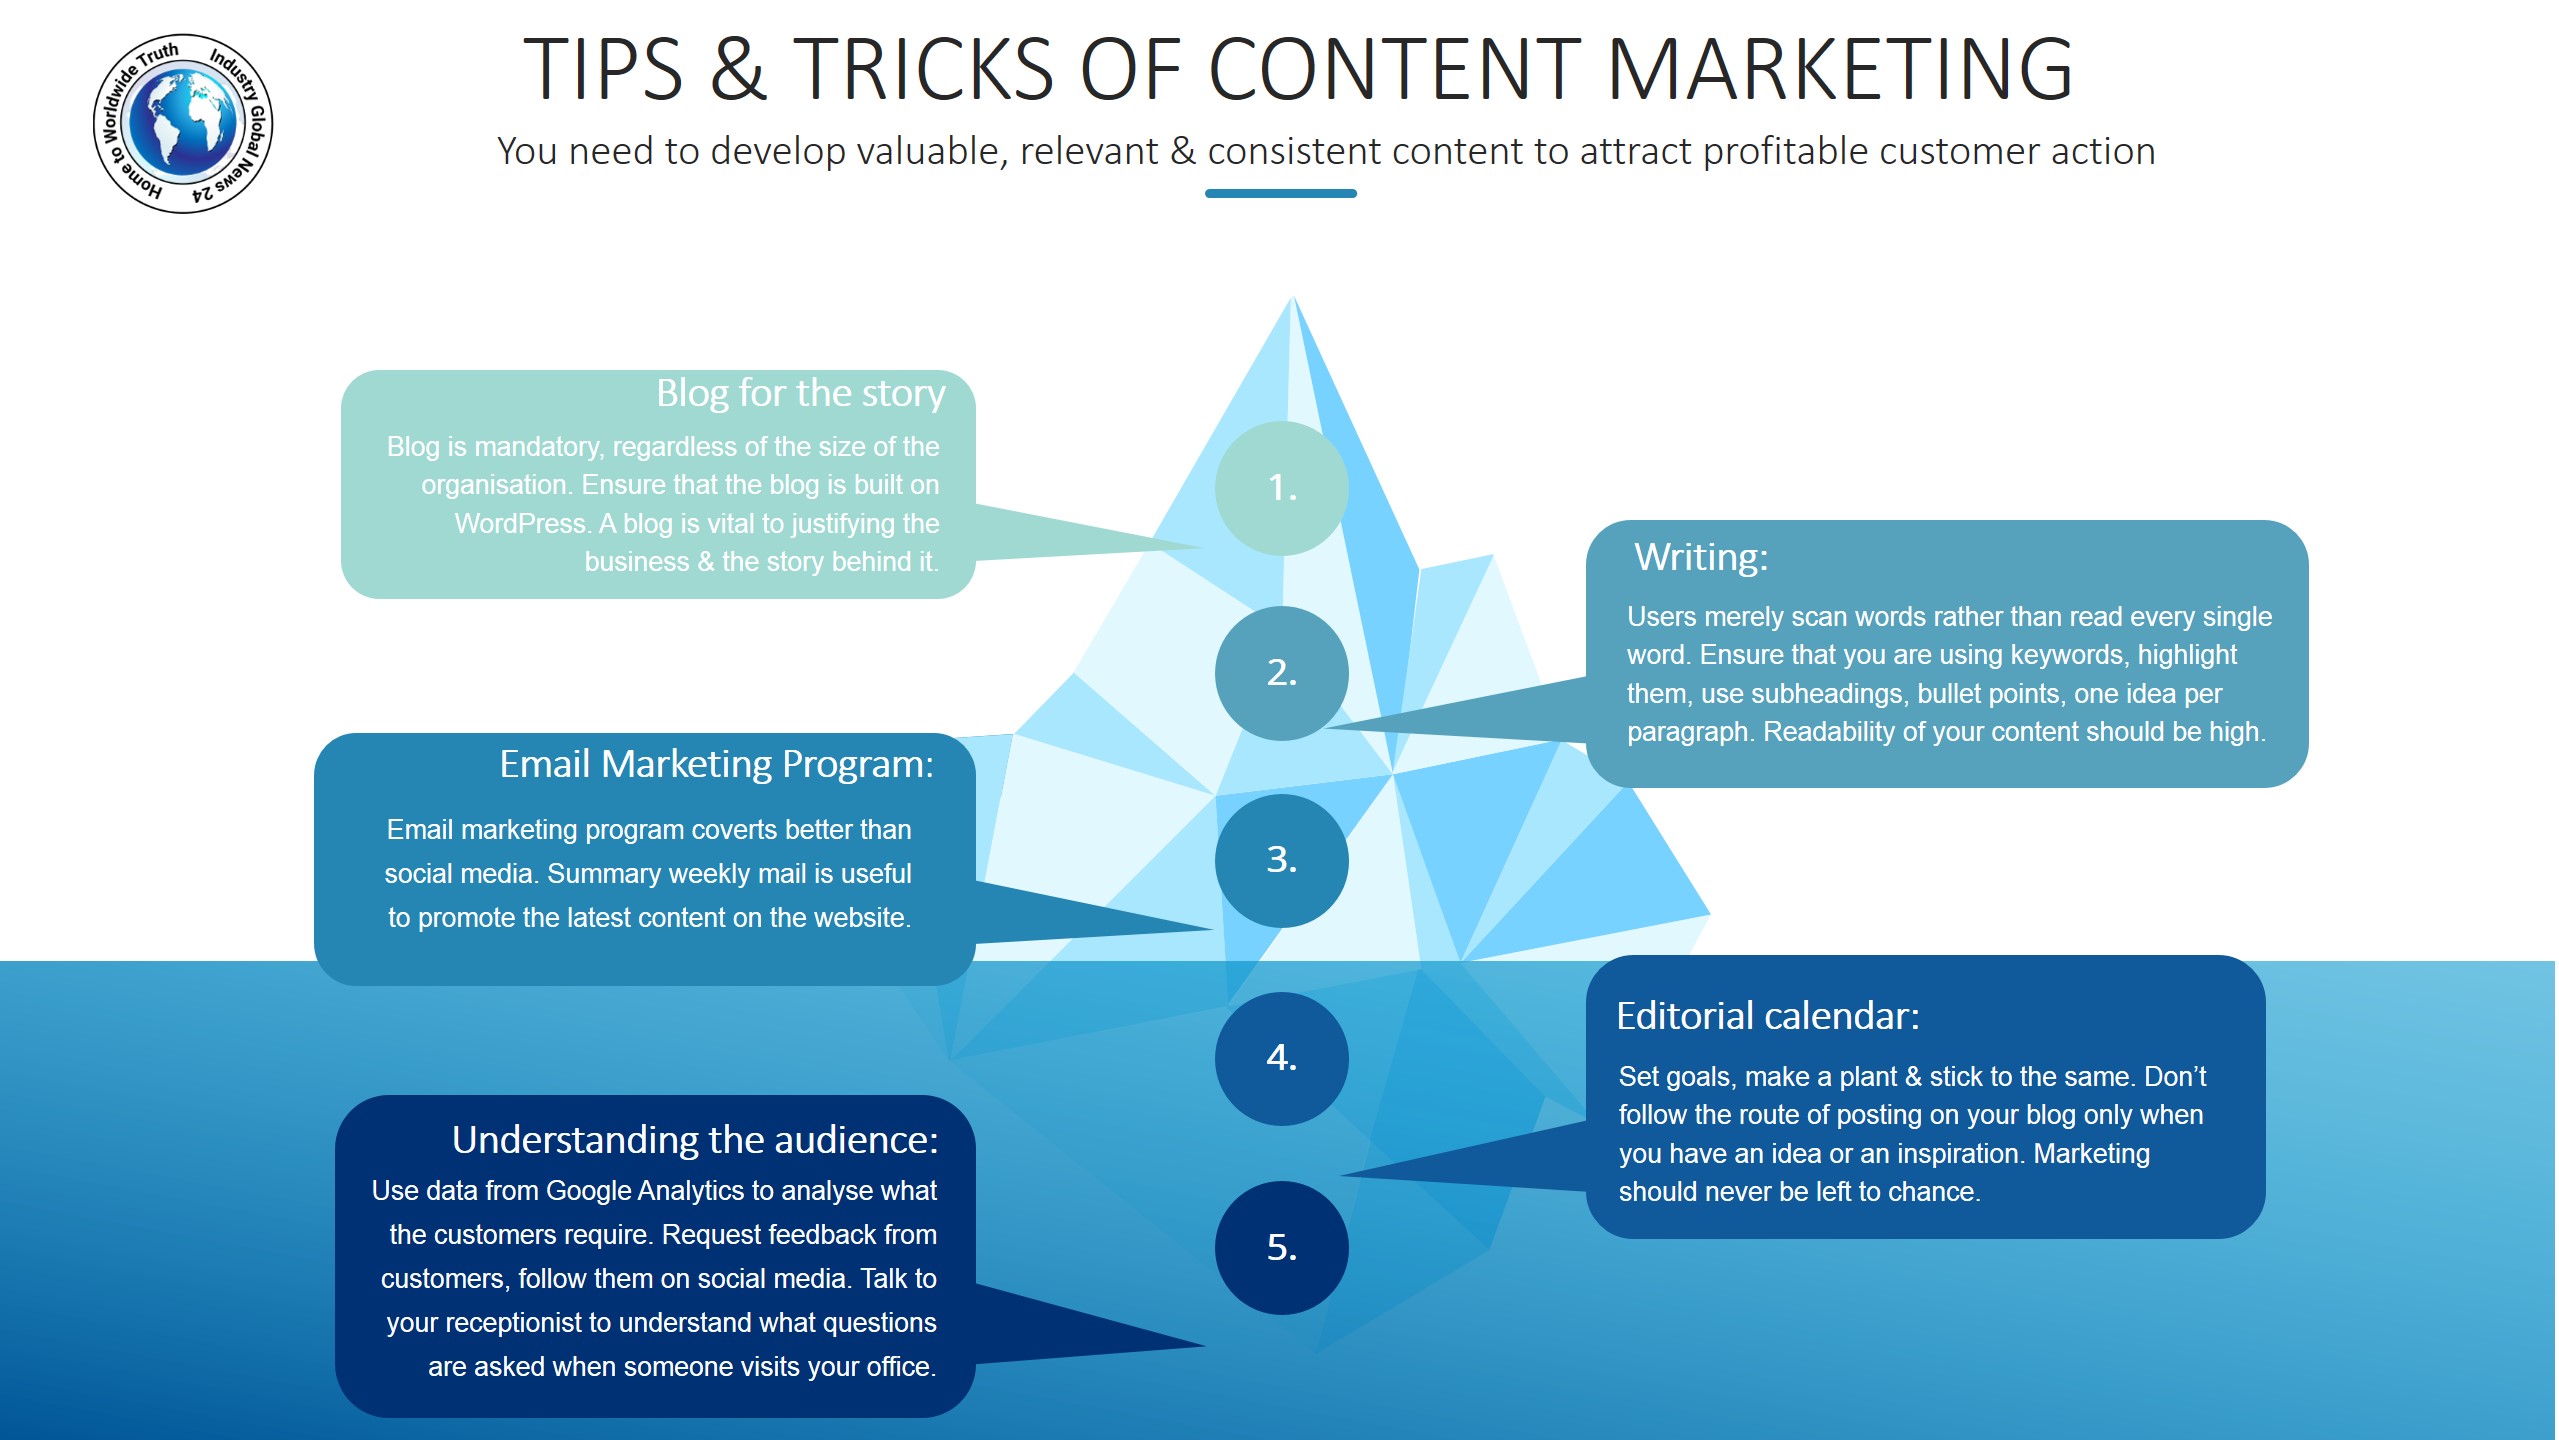 Tips & tricks of content marketing